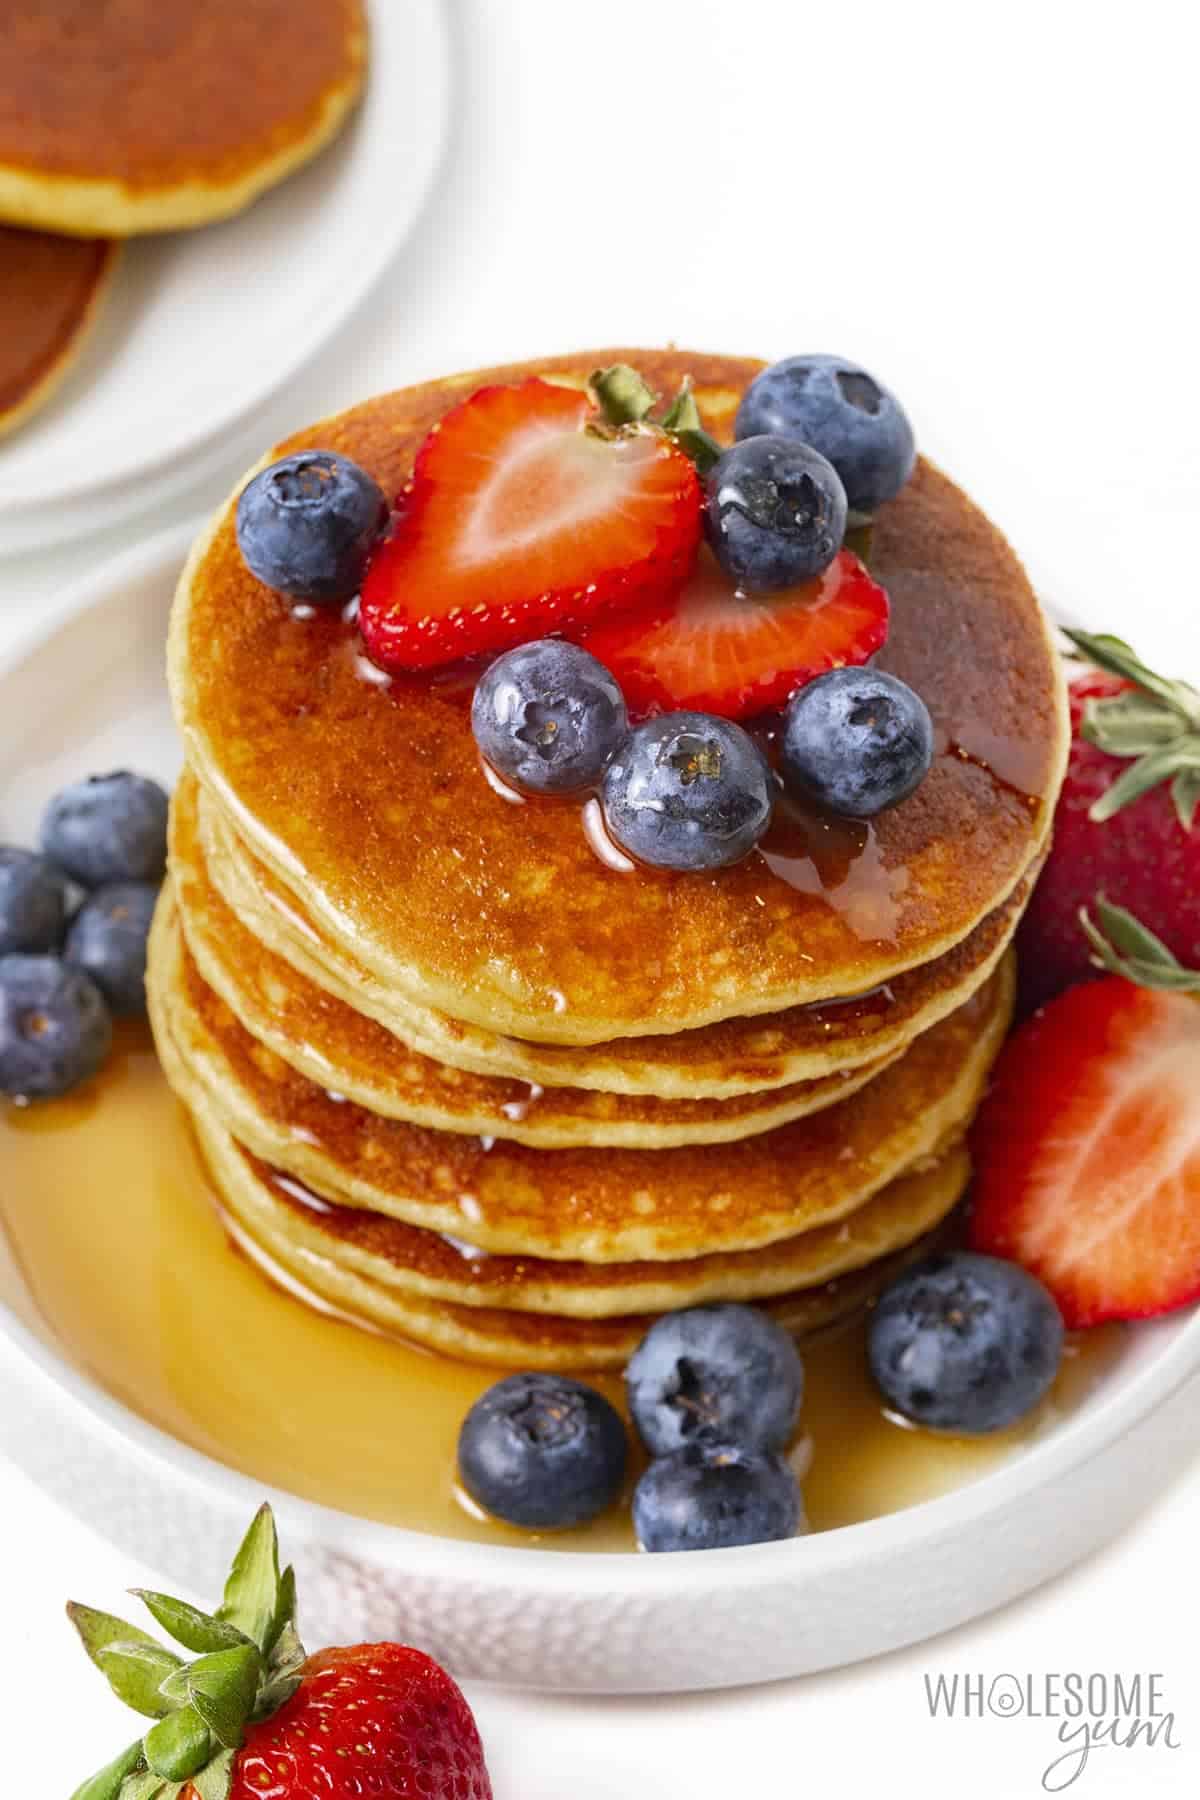 Low carb pancakes with berries and syrup.